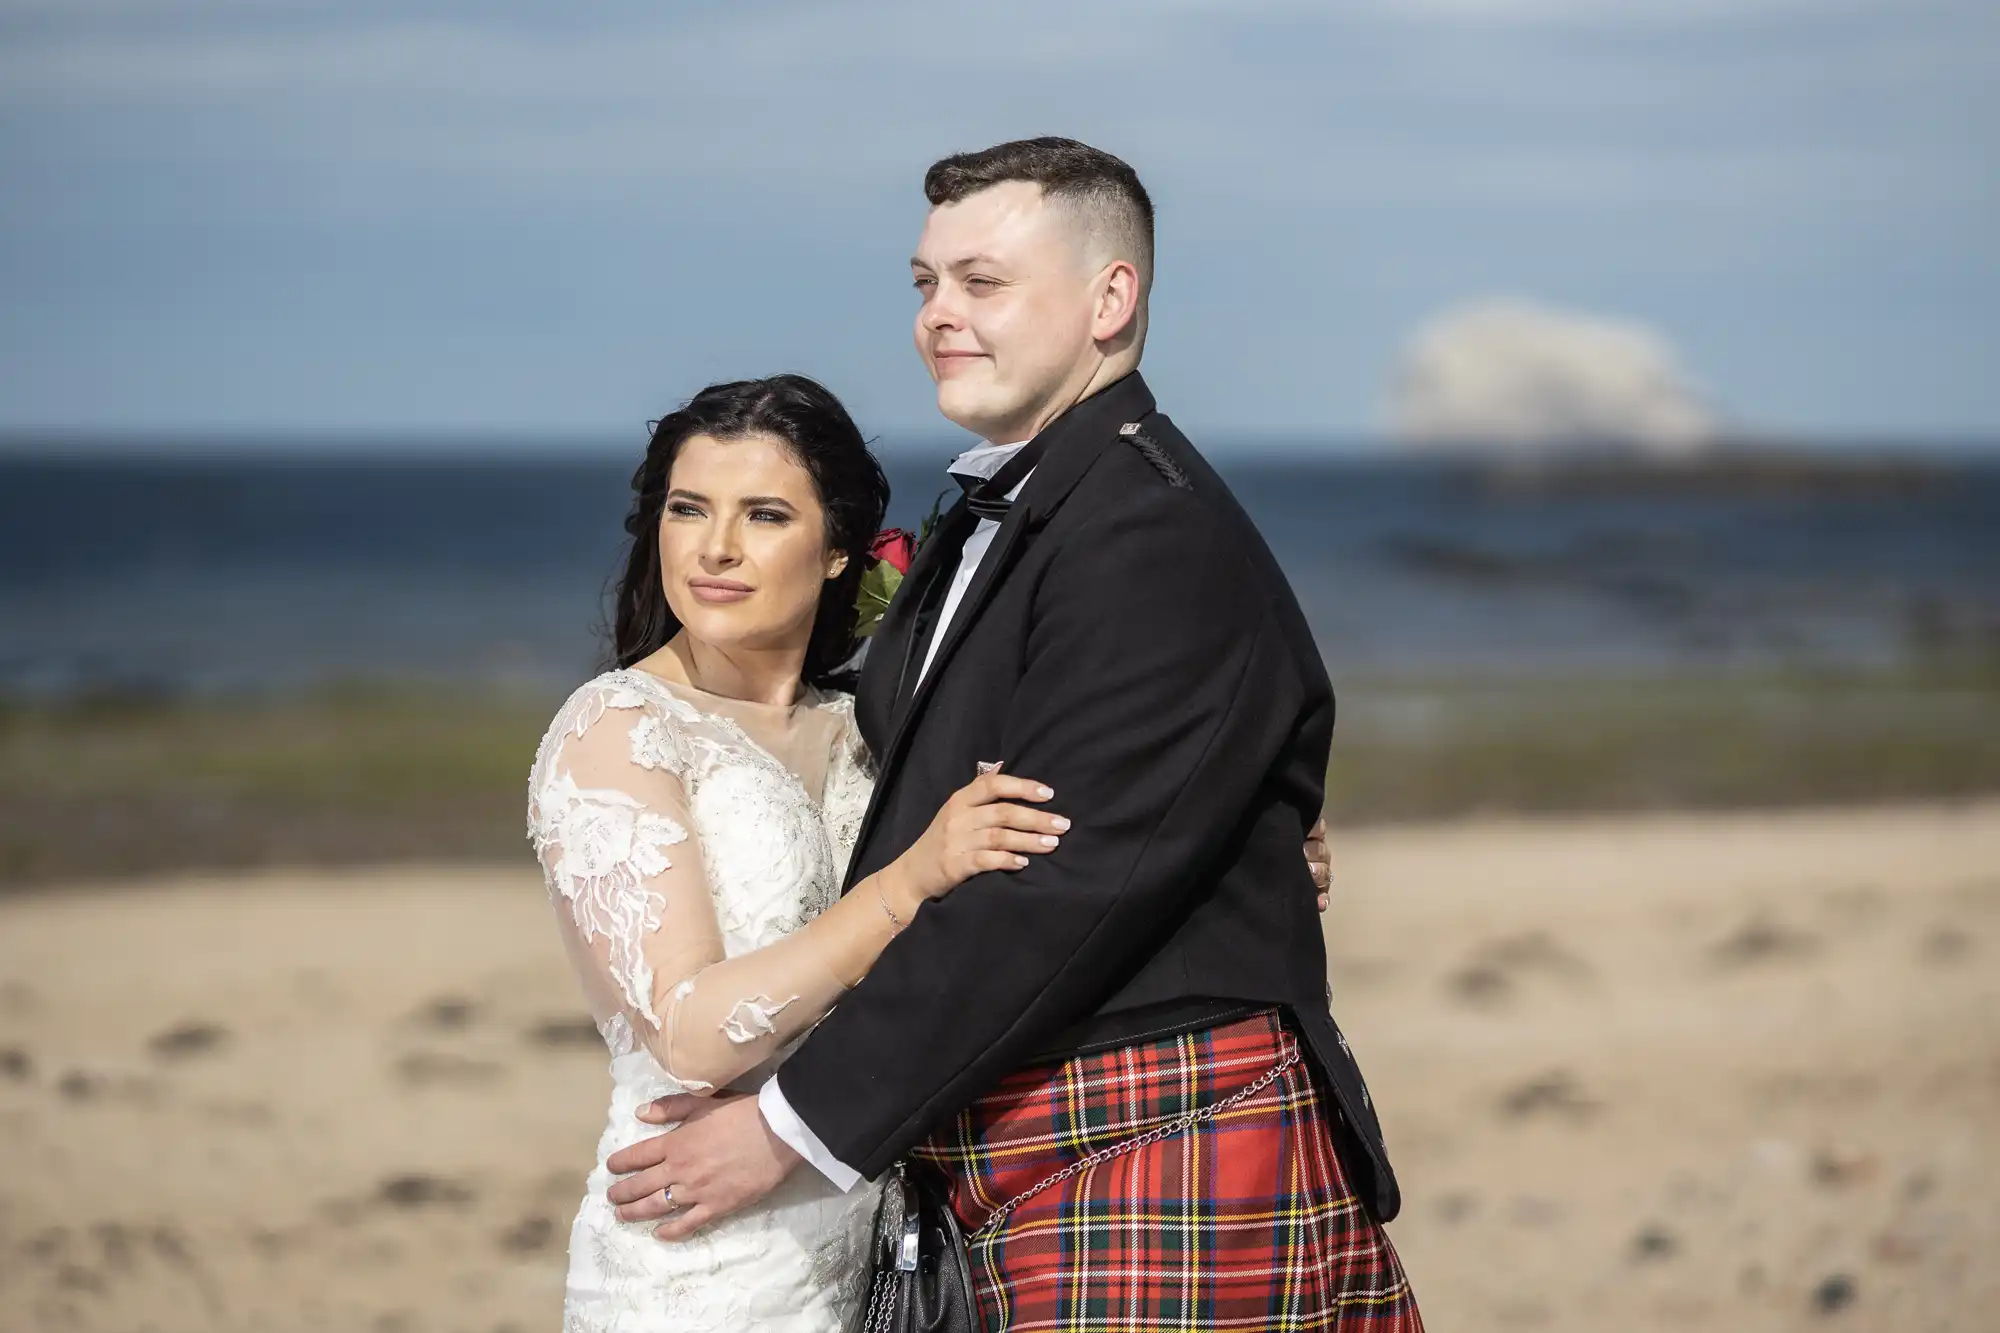 A bride wearing a white lace dress and a groom in a kilt embrace on a sandy beach with the ocean and a cloudy sky in the background.